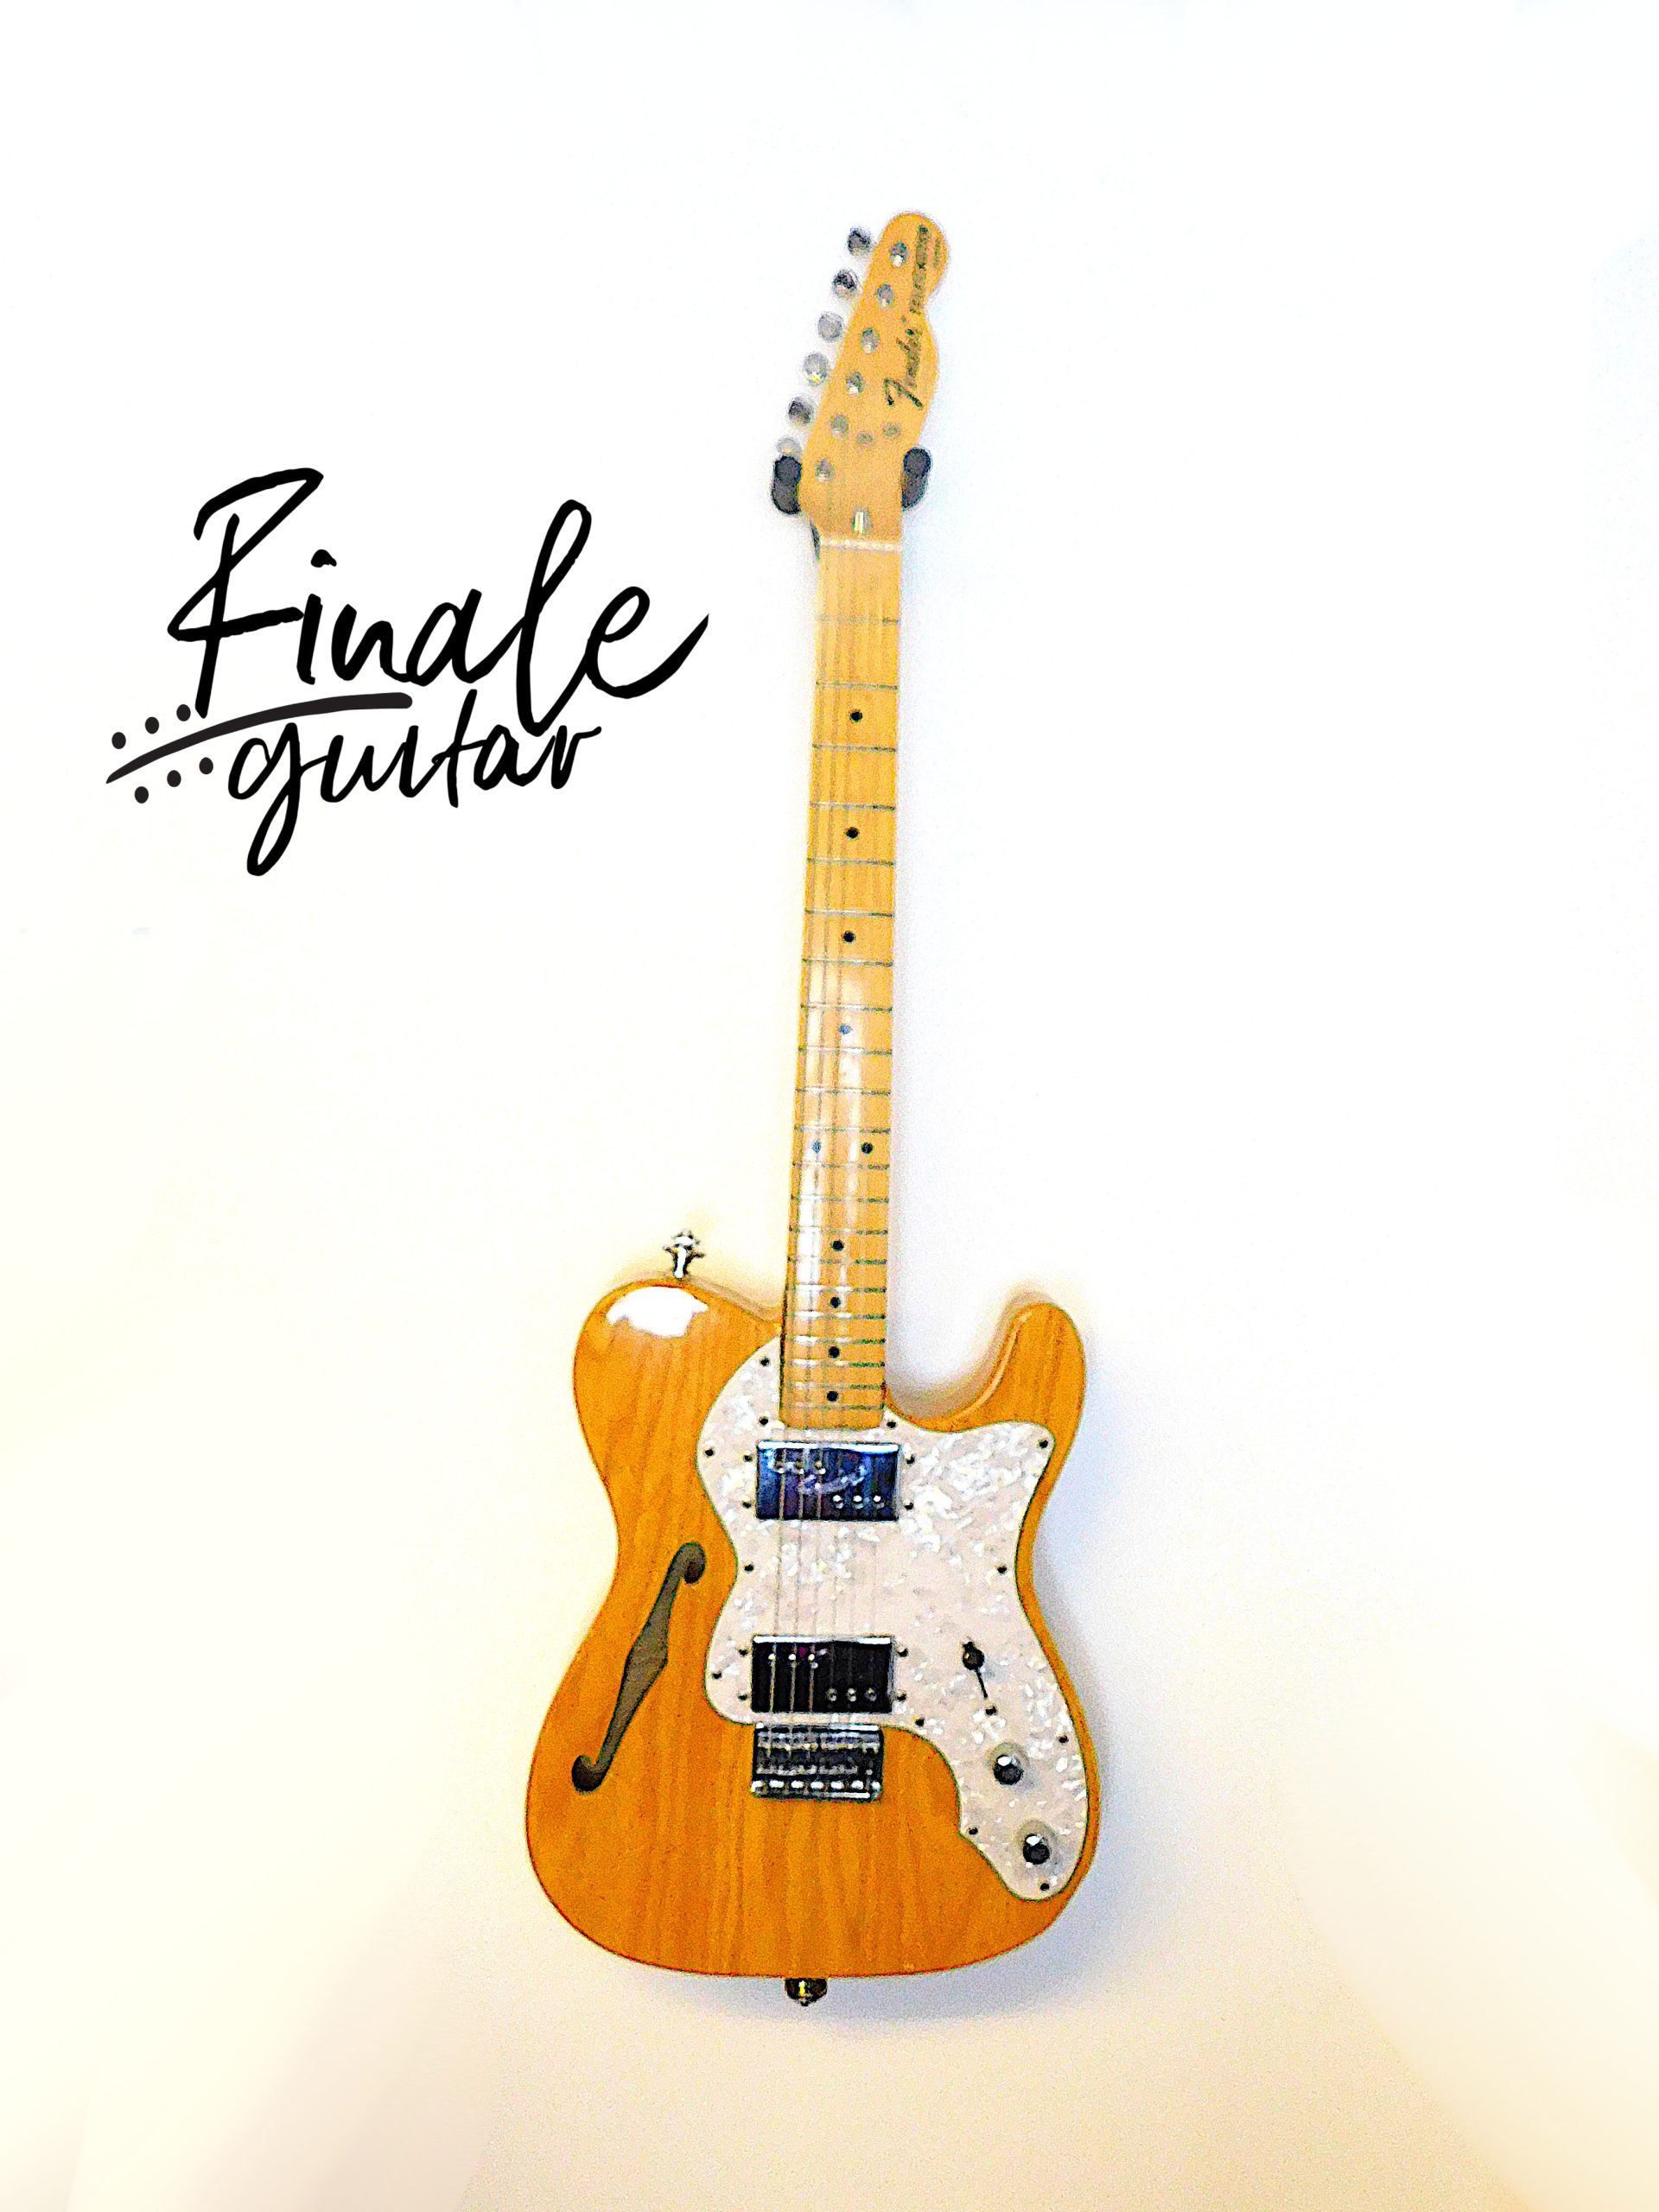 Fender TN-72 Thinline Telecaster Reissue (MIJ, 1985/6) with hard case for sale in our Sheffield guitar shop, Finale Guitar